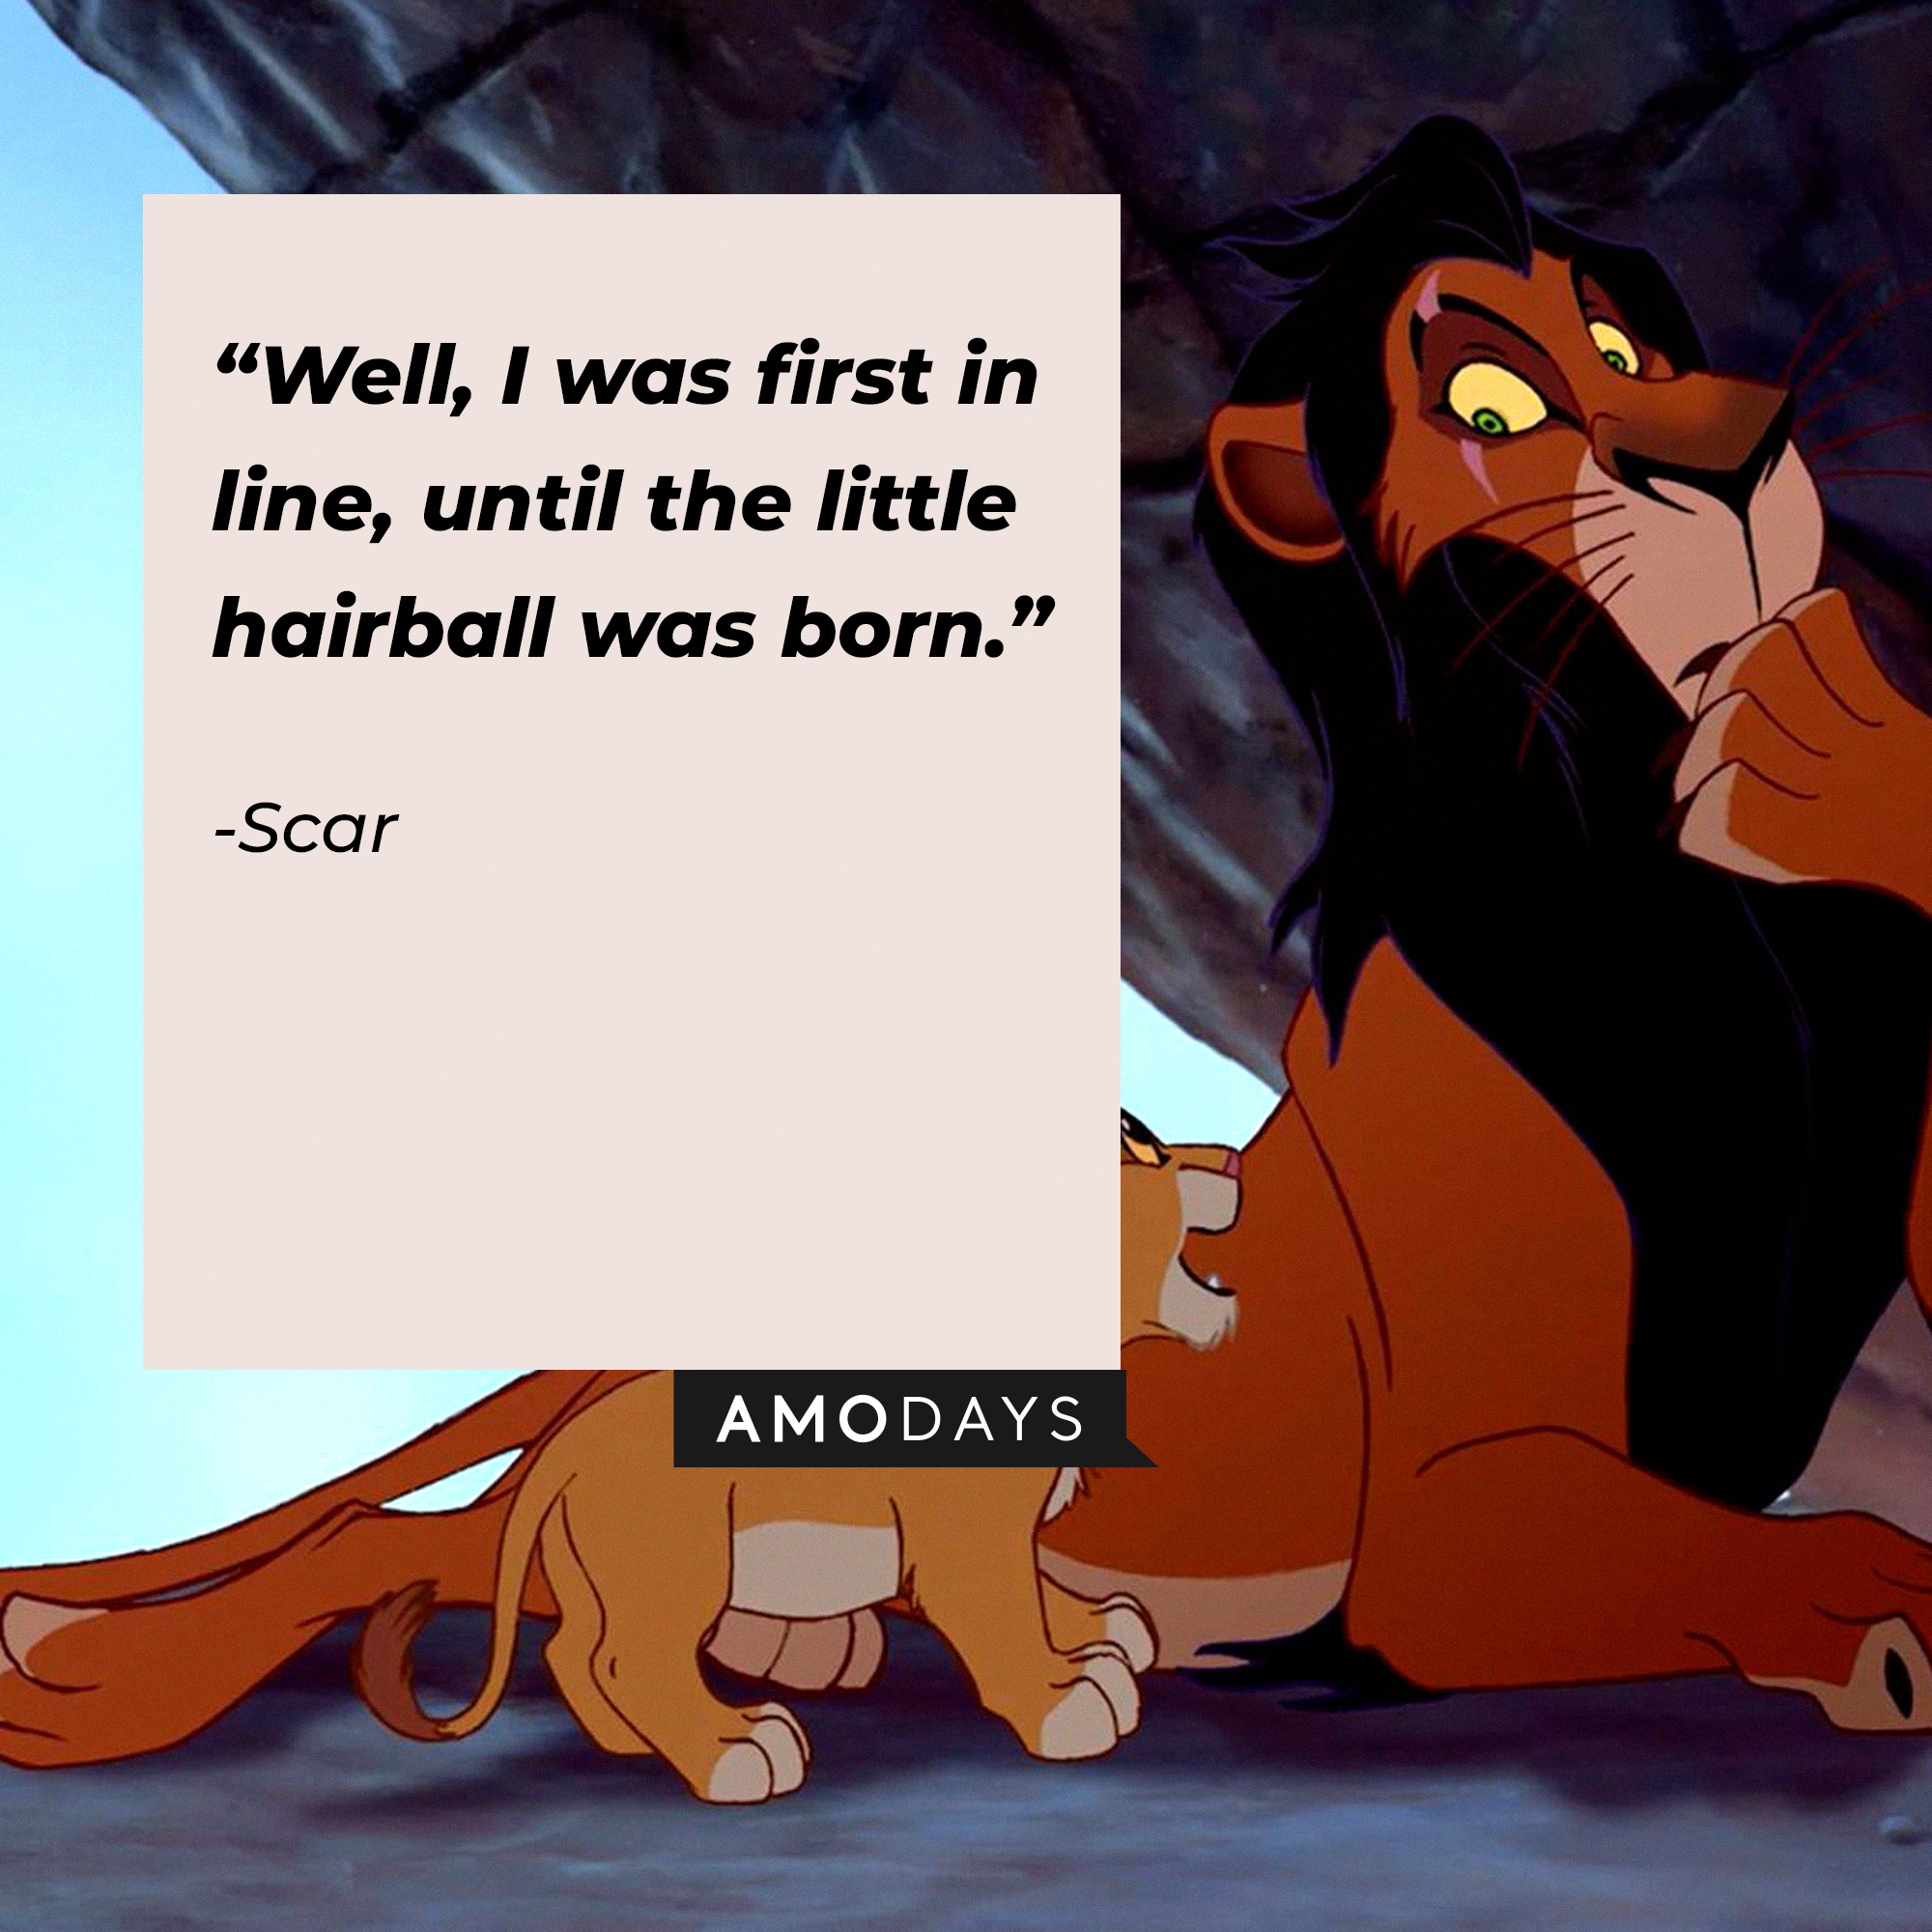 A photo of Scar with the quote, "Well, I was first in line, until the little hairball was born." | Source: Facebook/DisneyTheLionKing